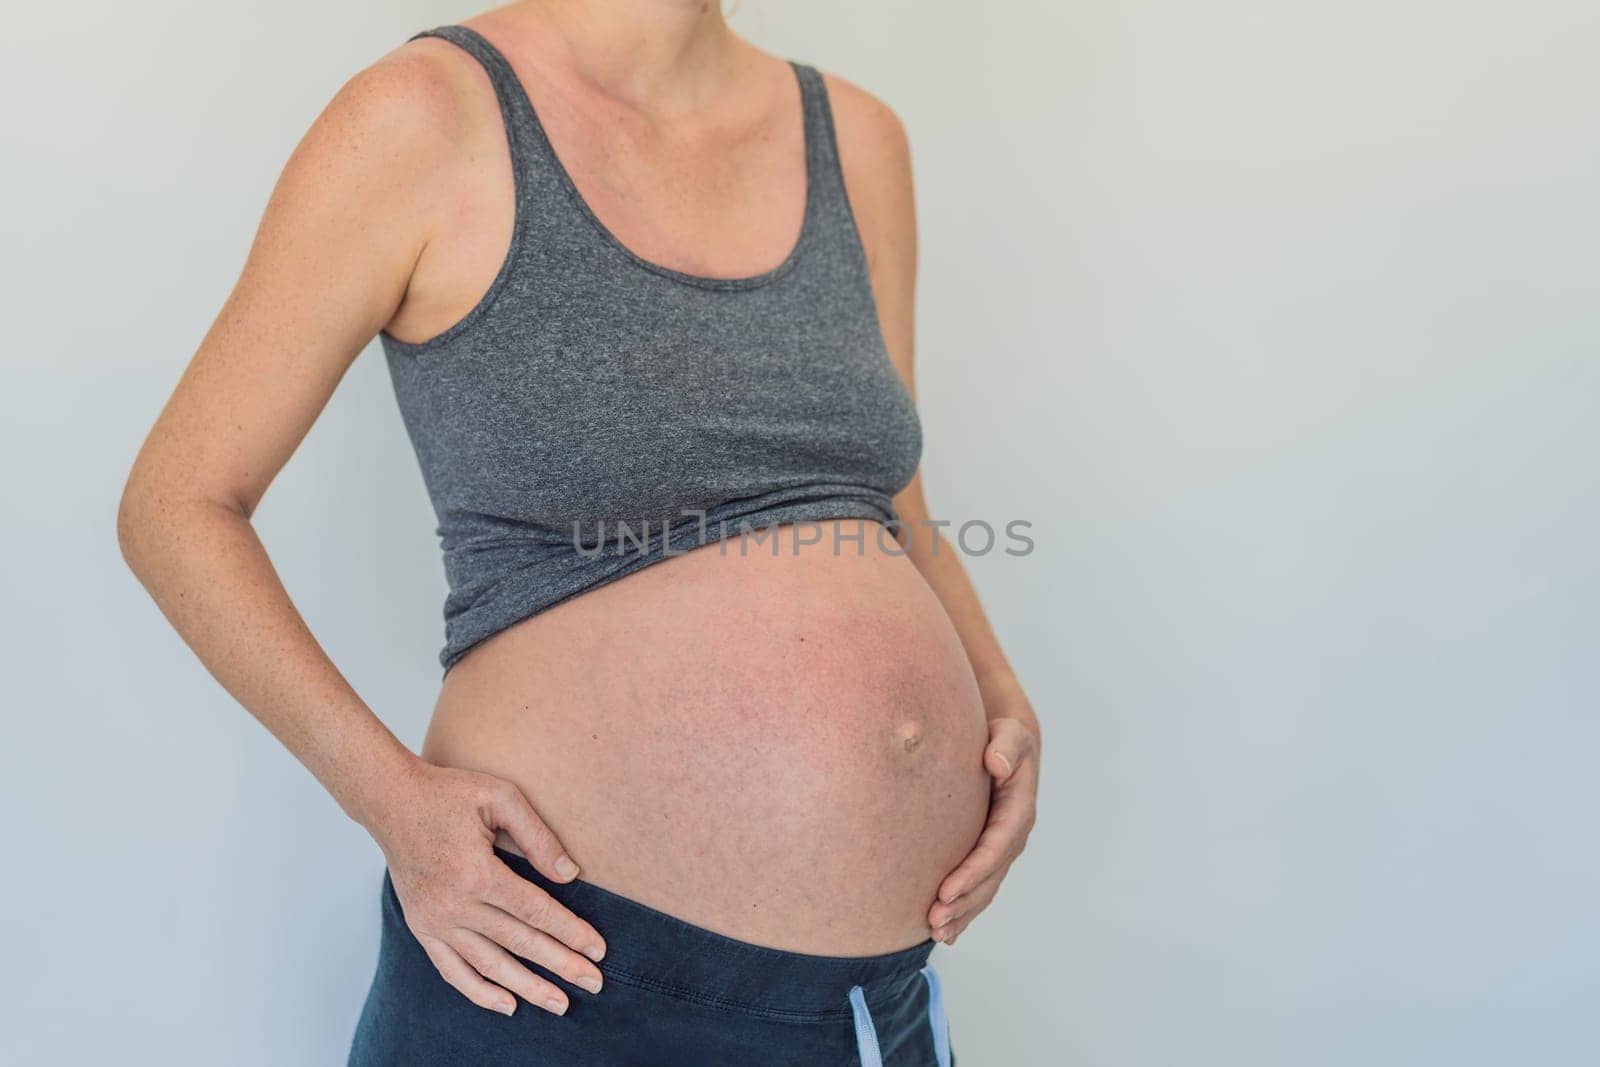 Expectant woman with sunburned, red skin, highlighting the importance of sun protection during pregnancy by galitskaya